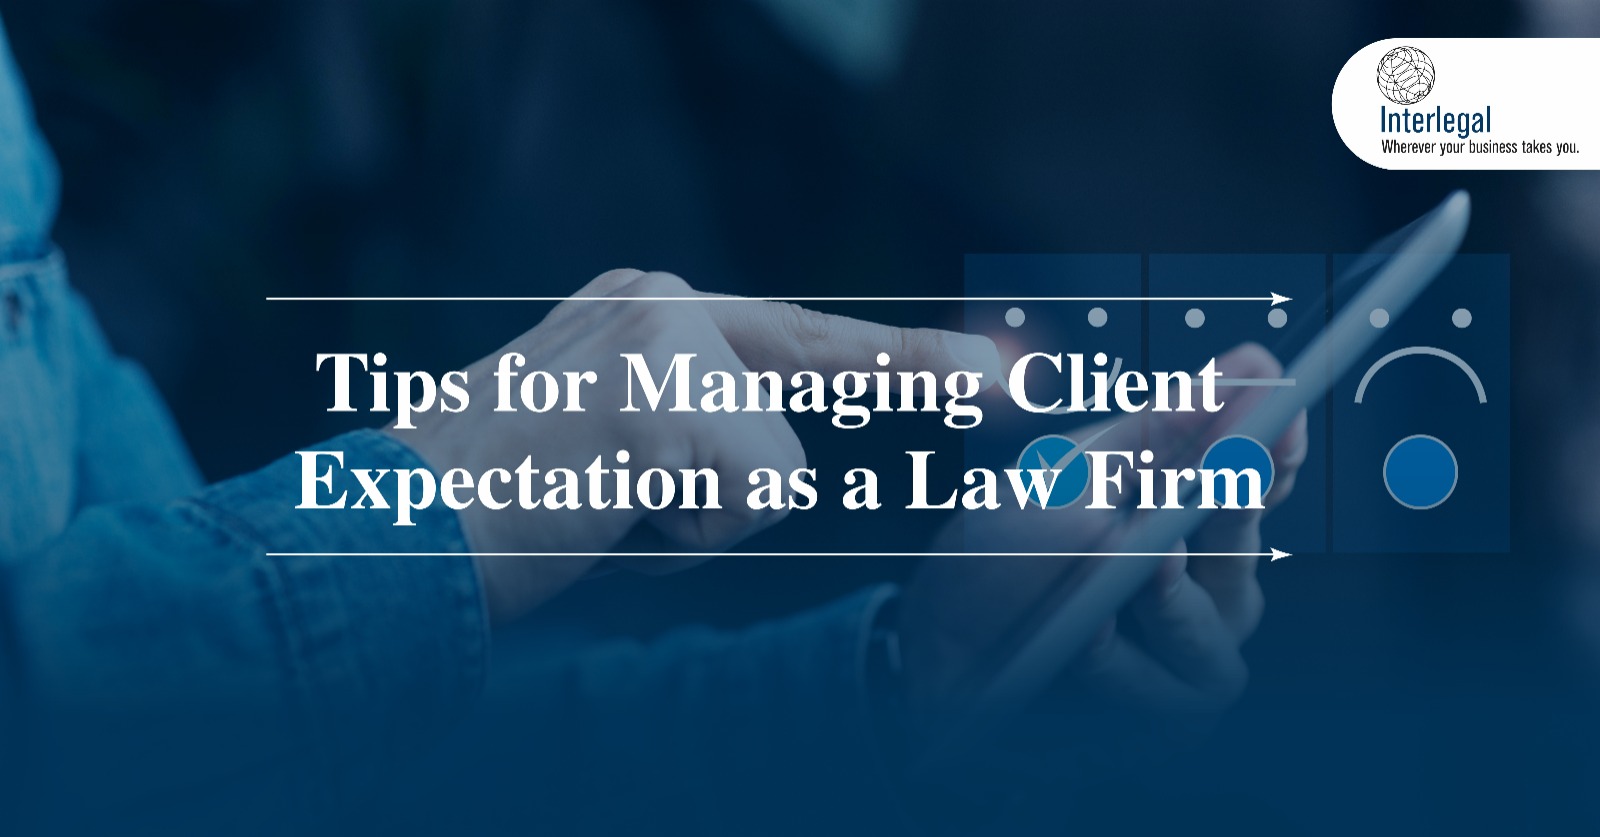 Tips for Managing Client Expectations as a Law Firm